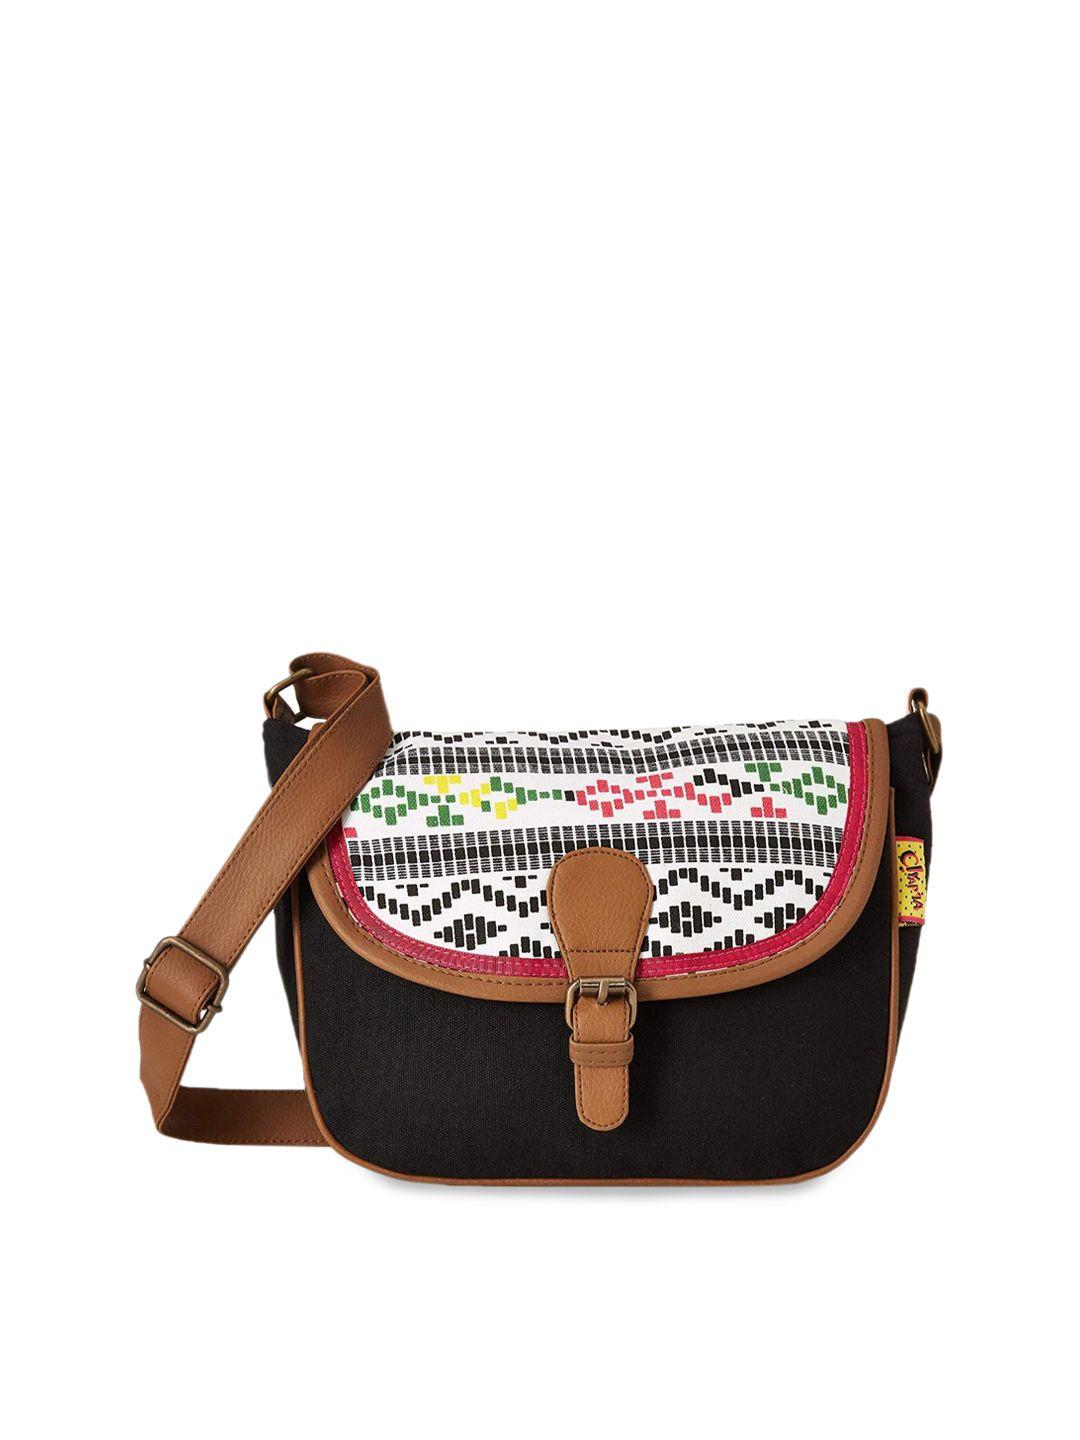 kanvas katha multicoloured geometric printed structured sling bag with cut work